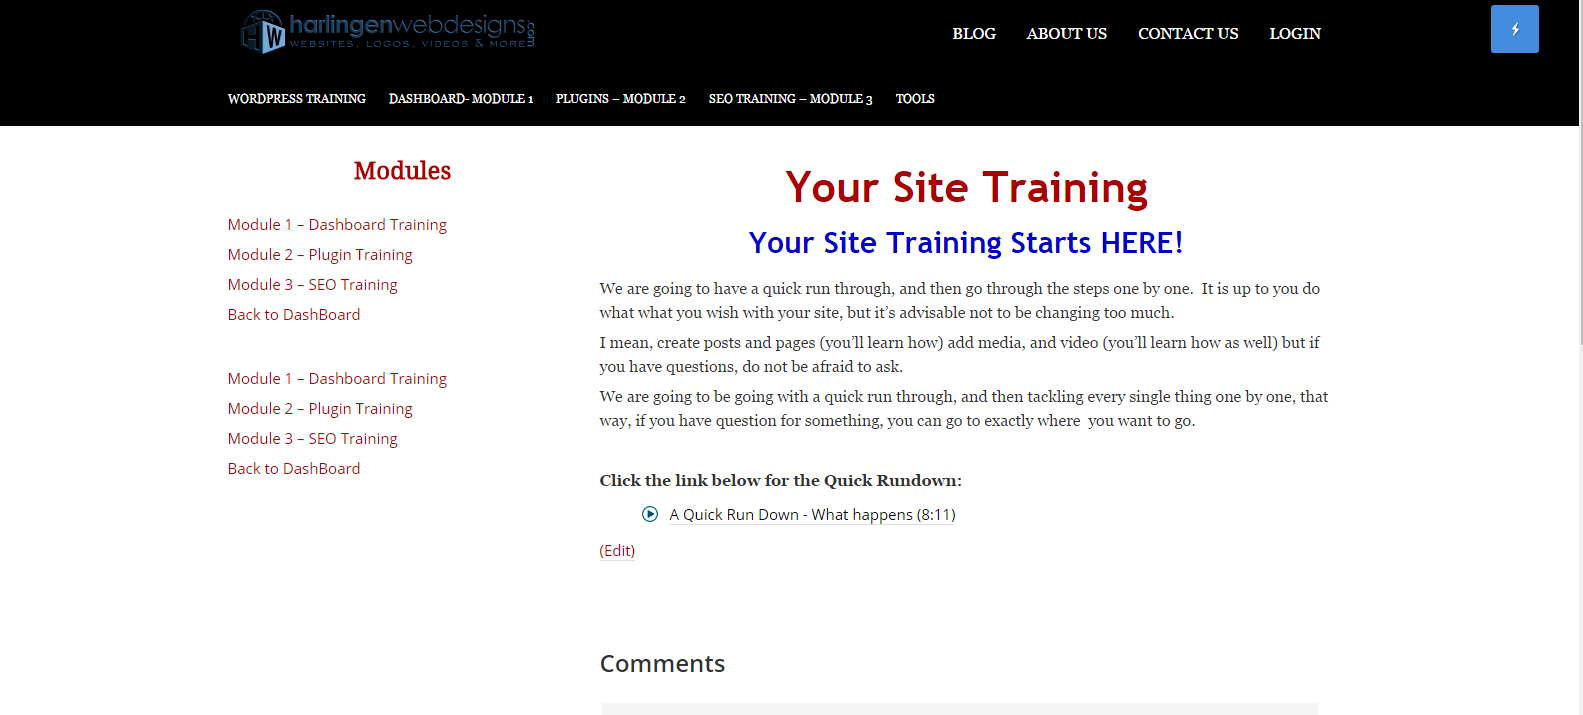 Website Editing and Training